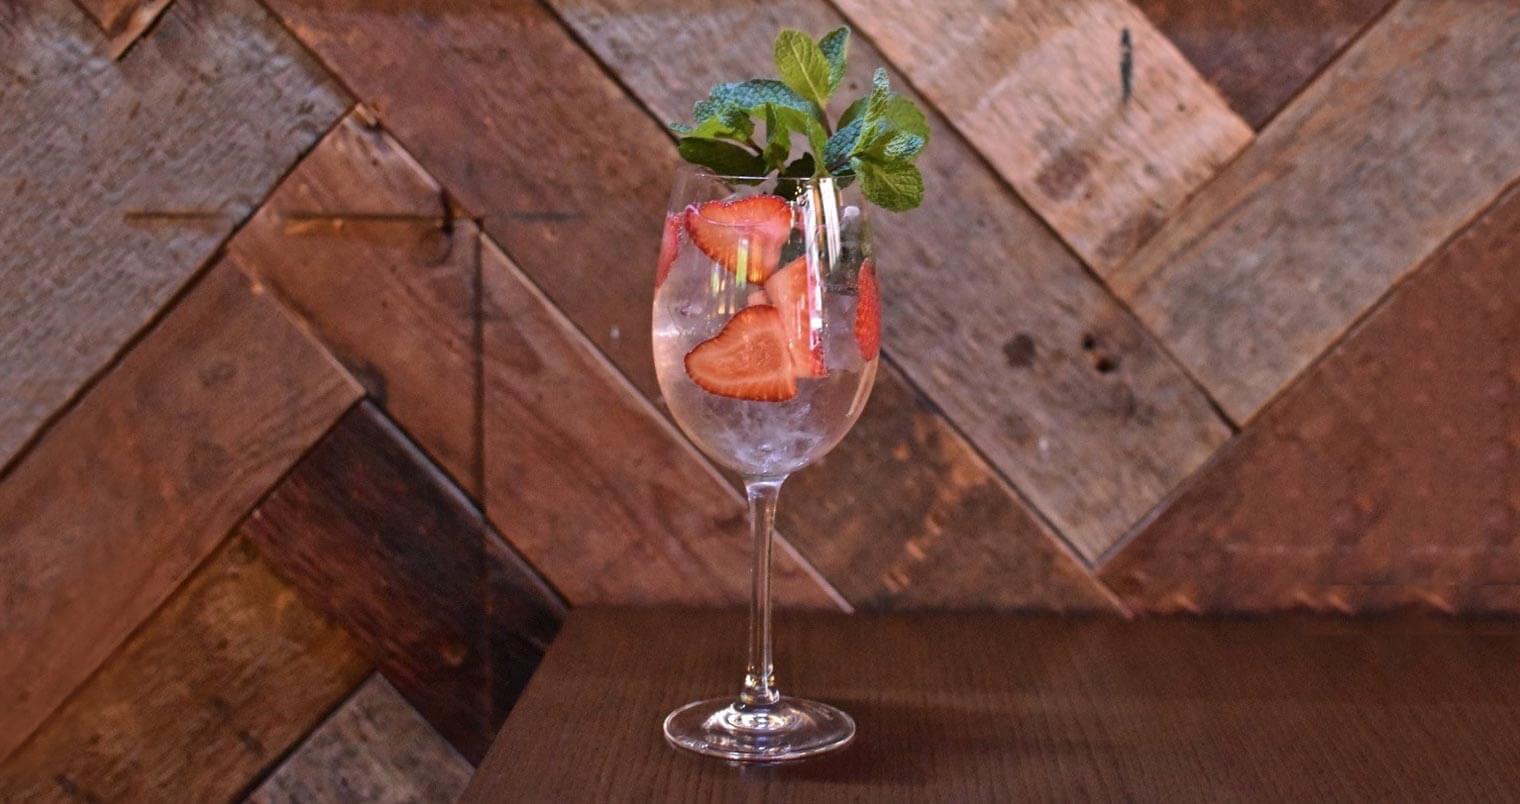 Skinny Spritzer cocktaial with strawberry and mint garnish, featured image